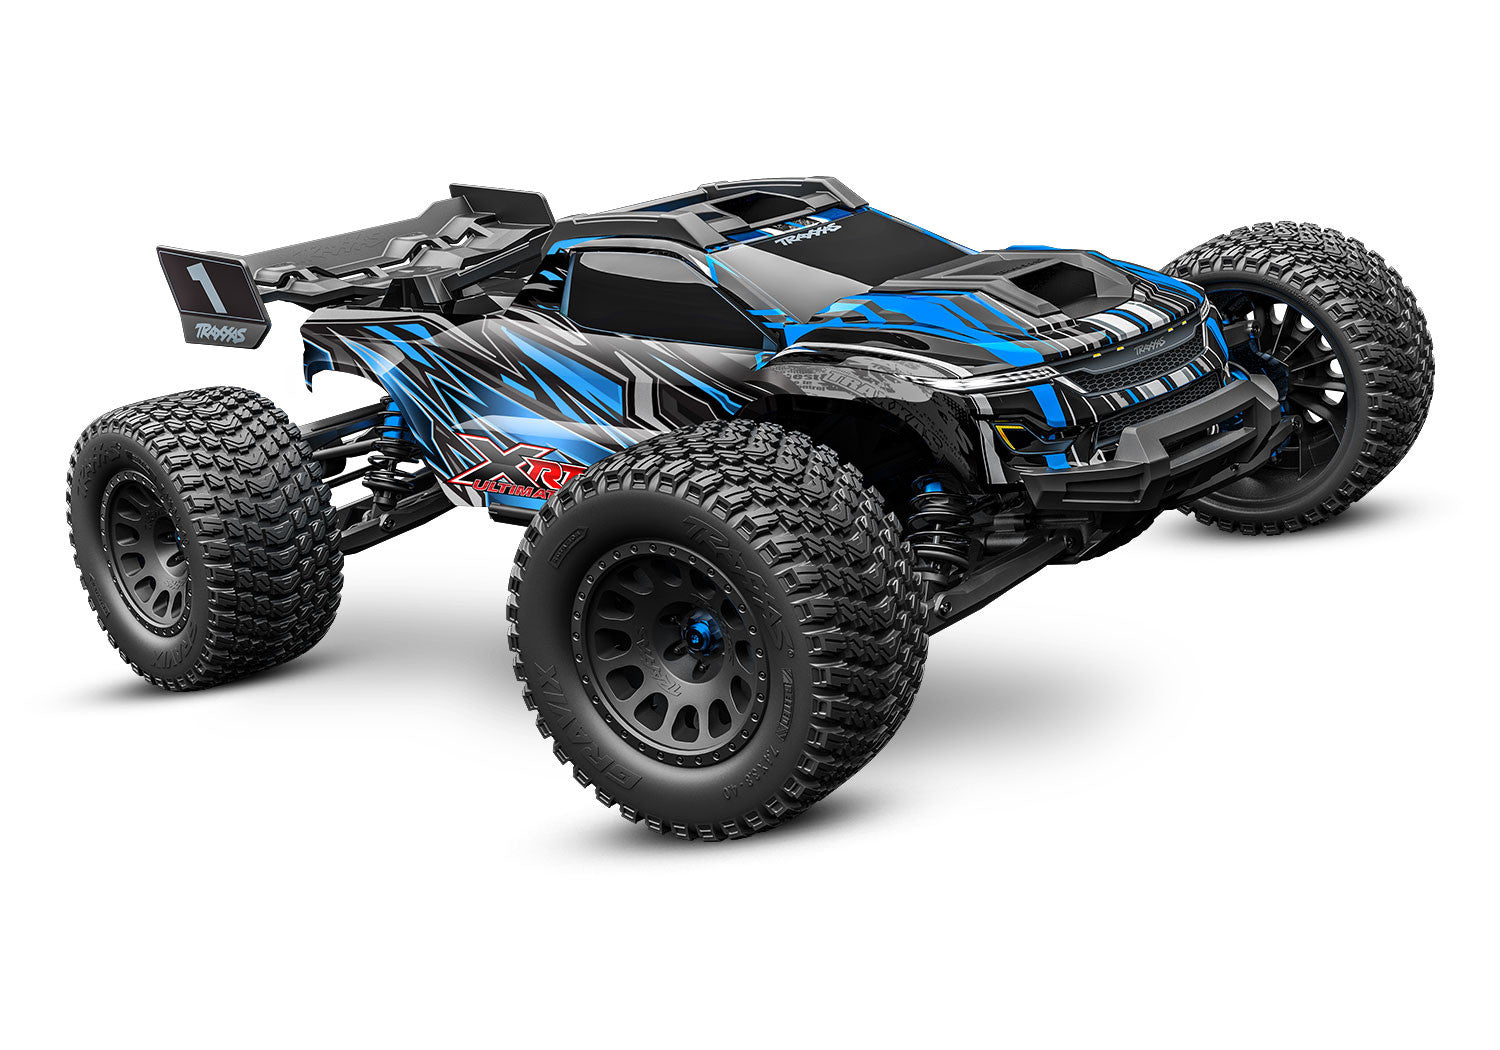 ROCK CRAWLER RC 1/10 SCALE PARCOURS FOR 4x4 VEHICLES 